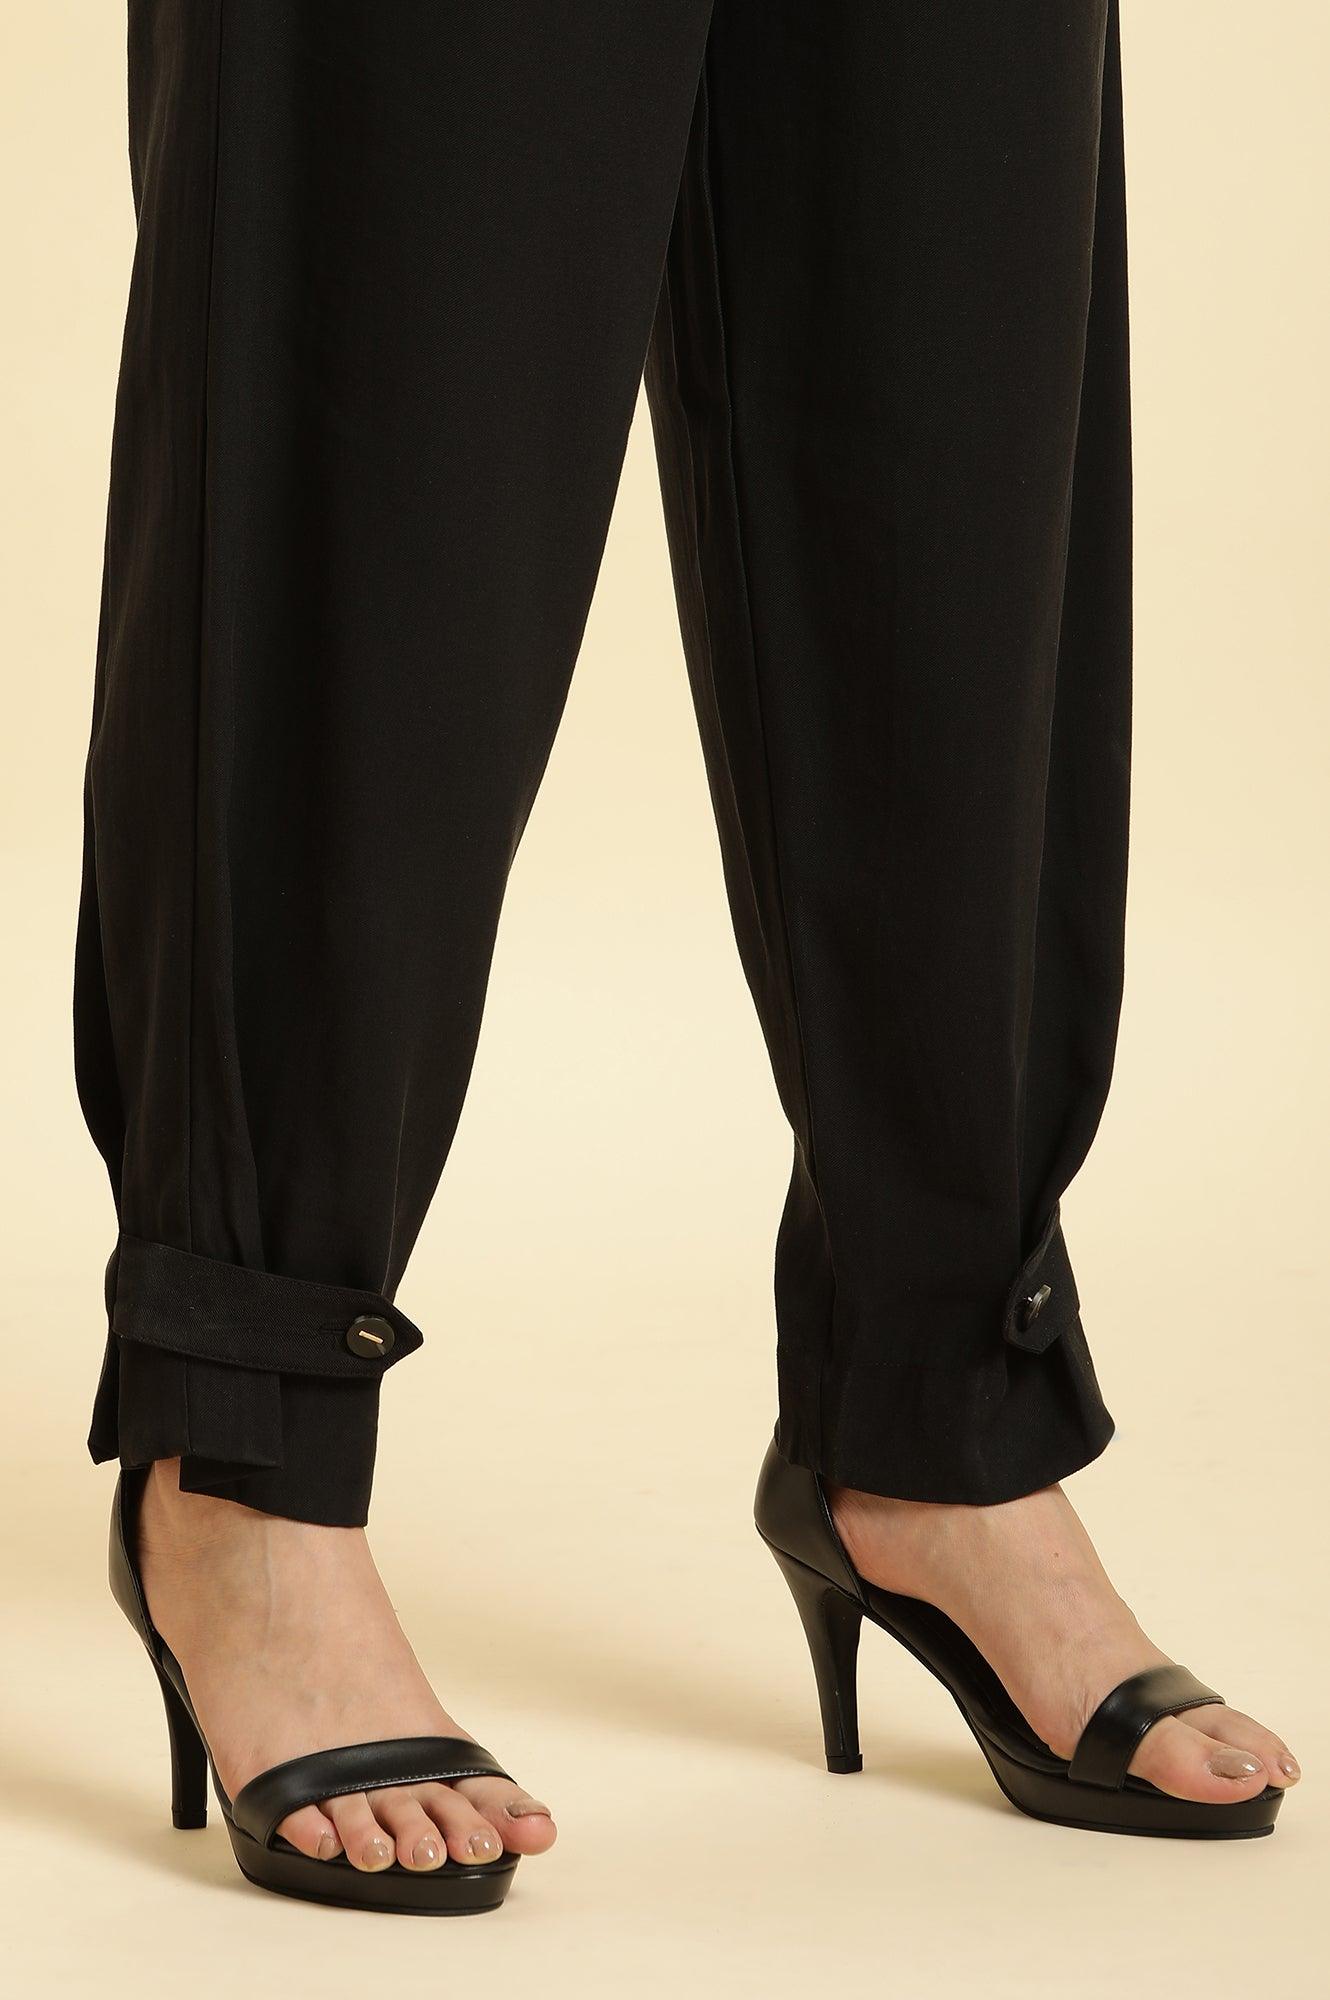 Black Straight Trouser With Button Tab On Hemline - wforwoman